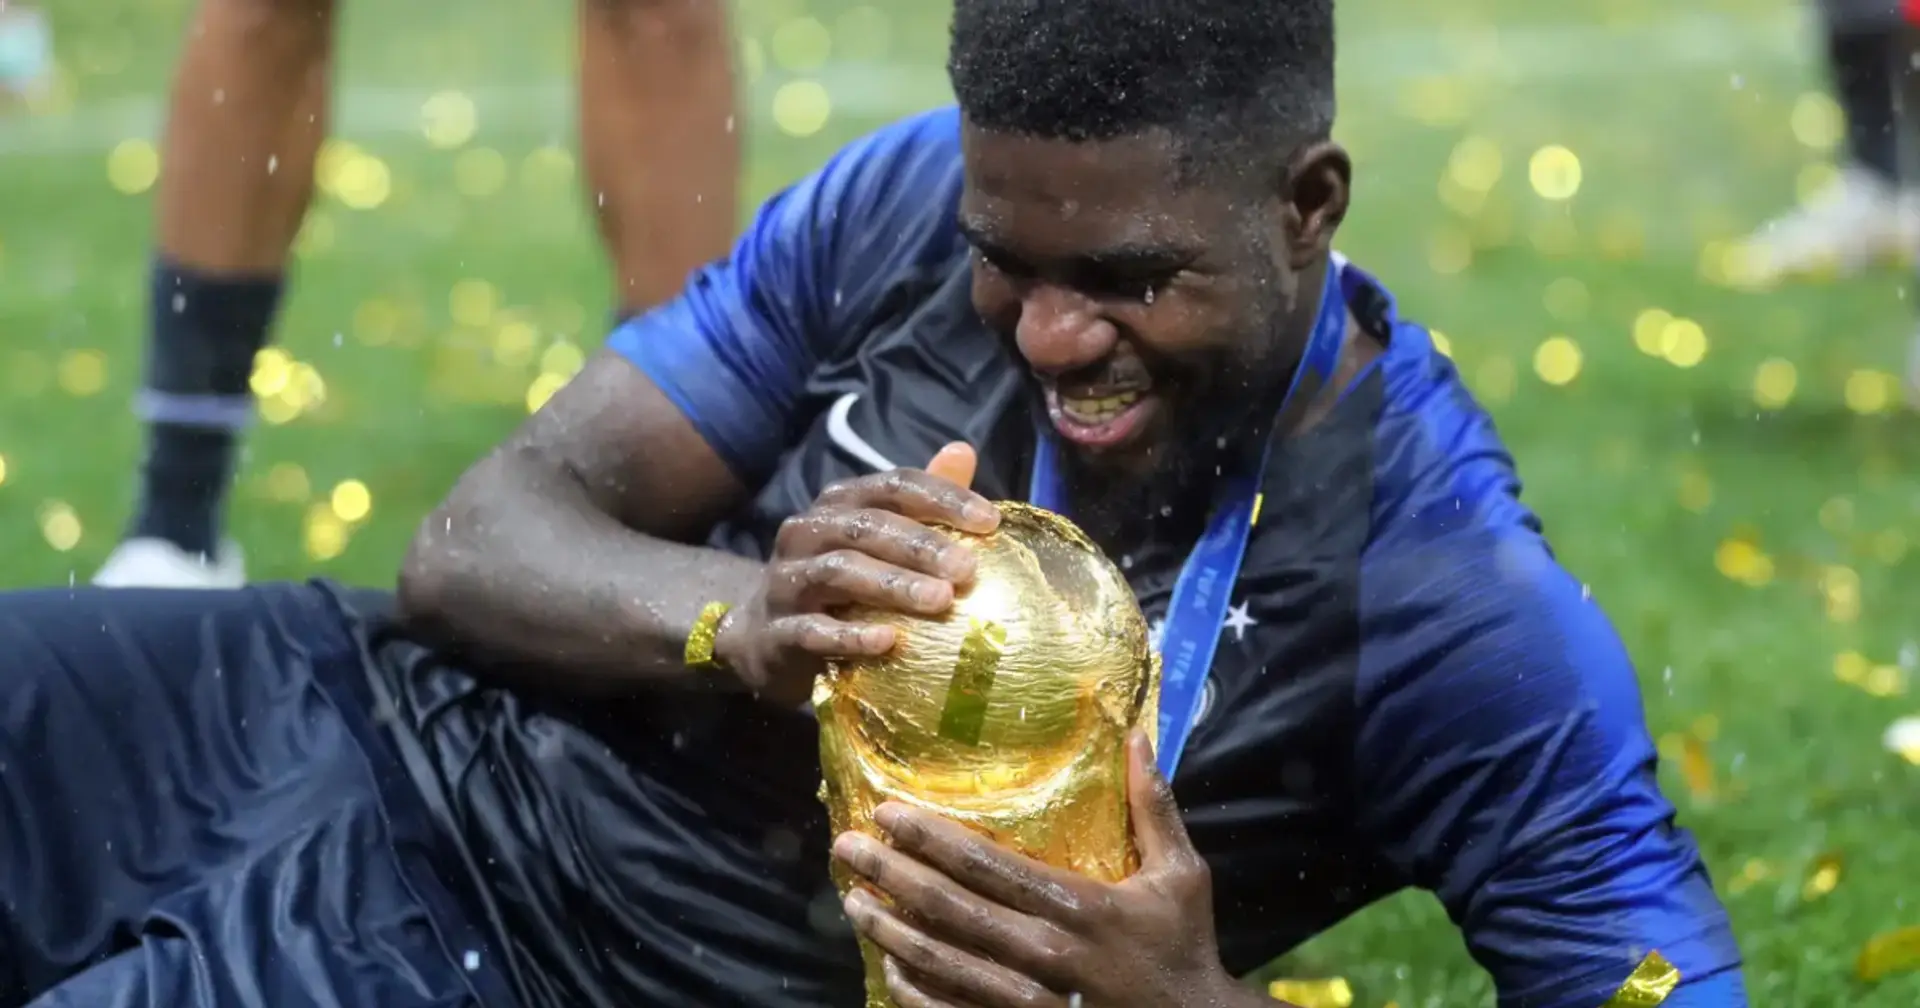 Umtiti could leave this week after Serie A club tells Barca they want him (reliability: 4 stars)